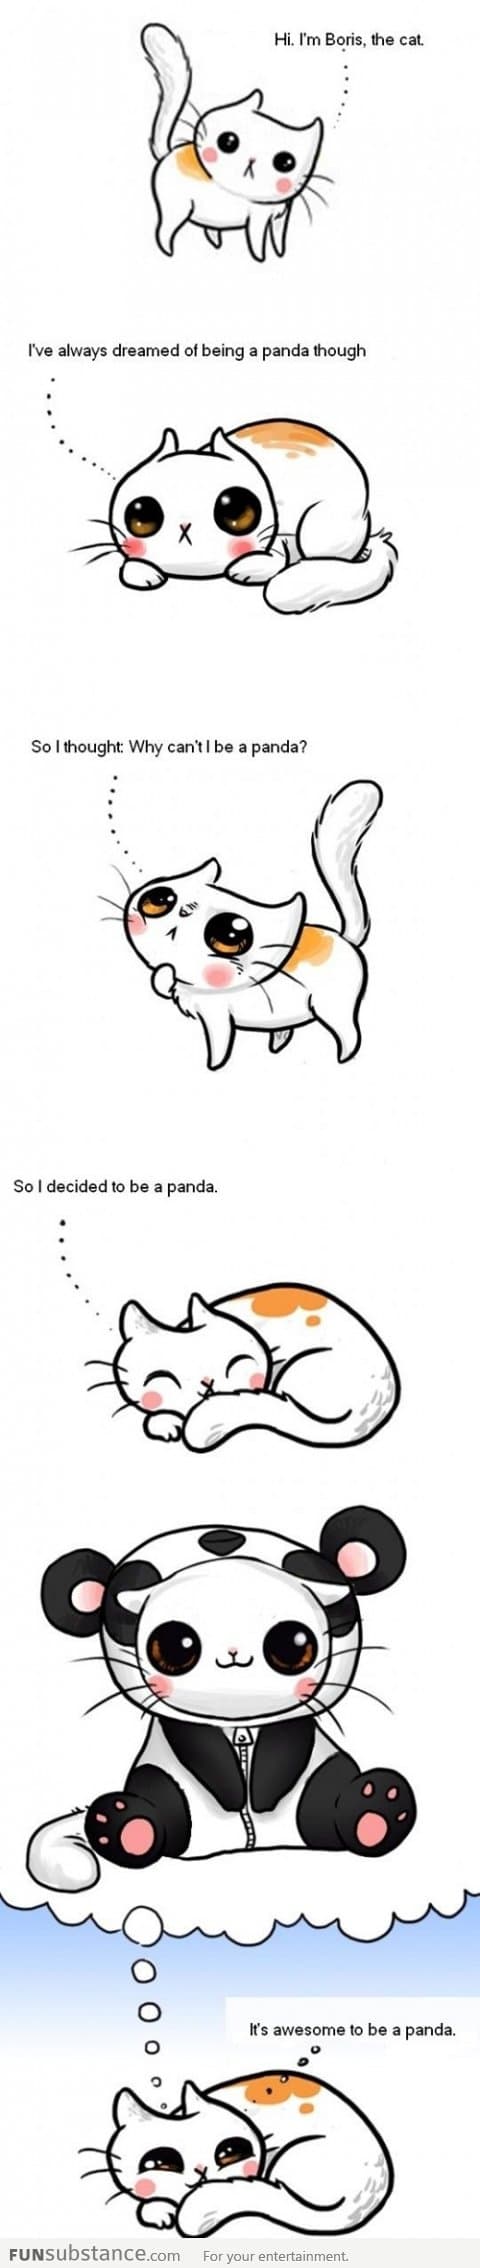 It’s awesome to be a panda